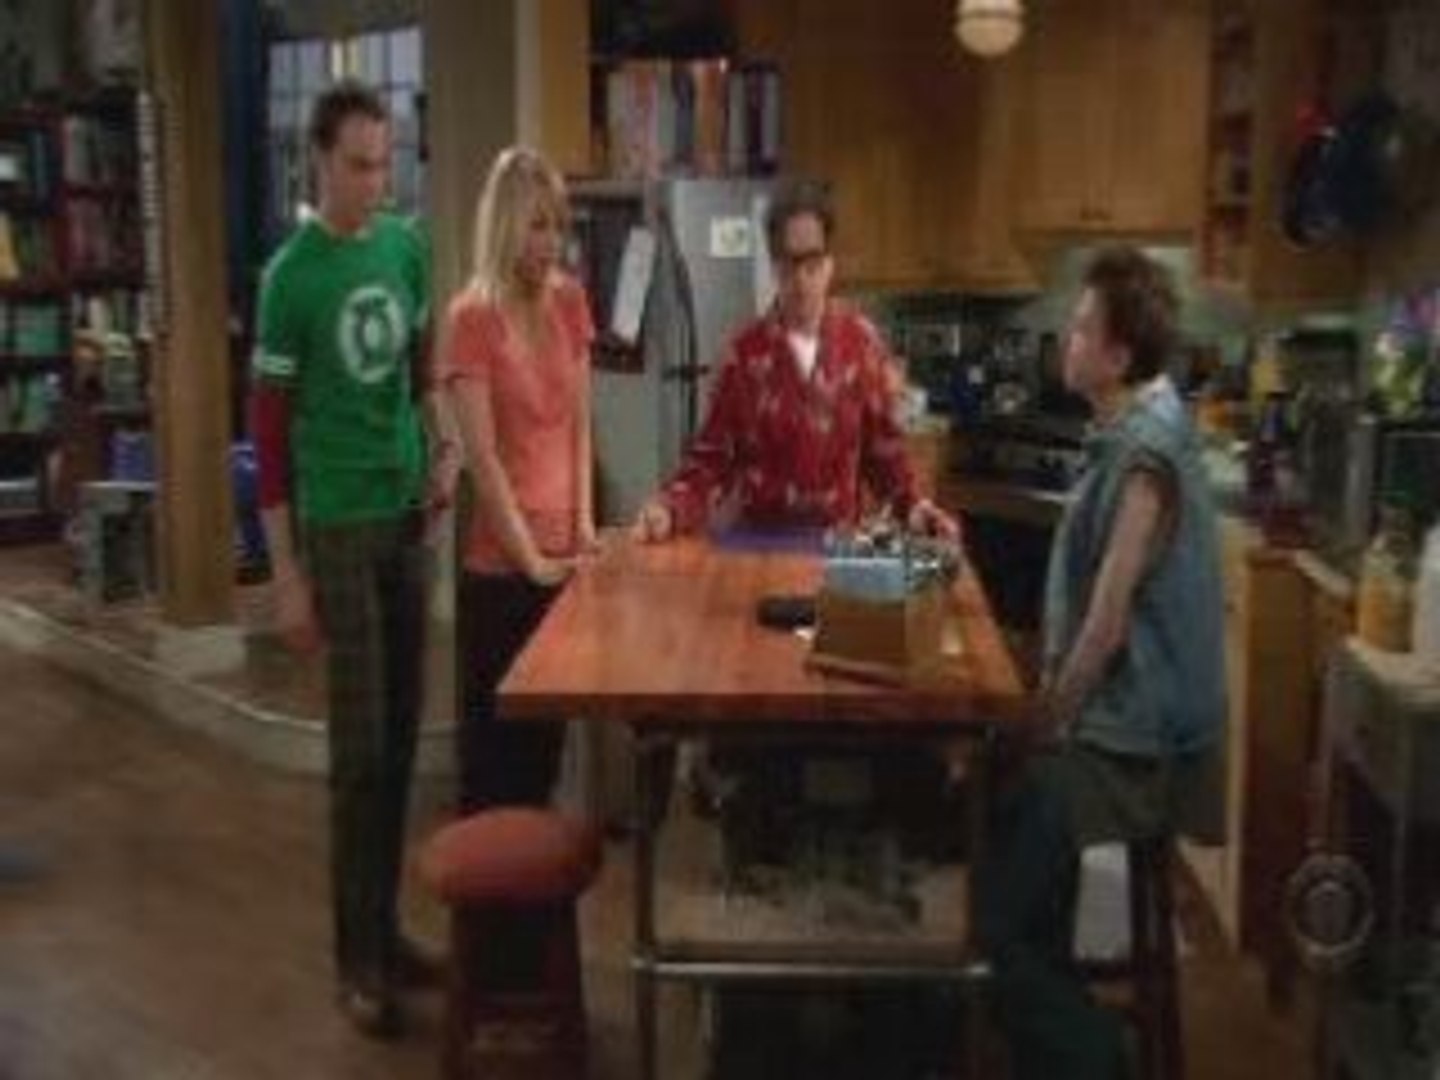 Philippines mentioned on Big Bang Theory